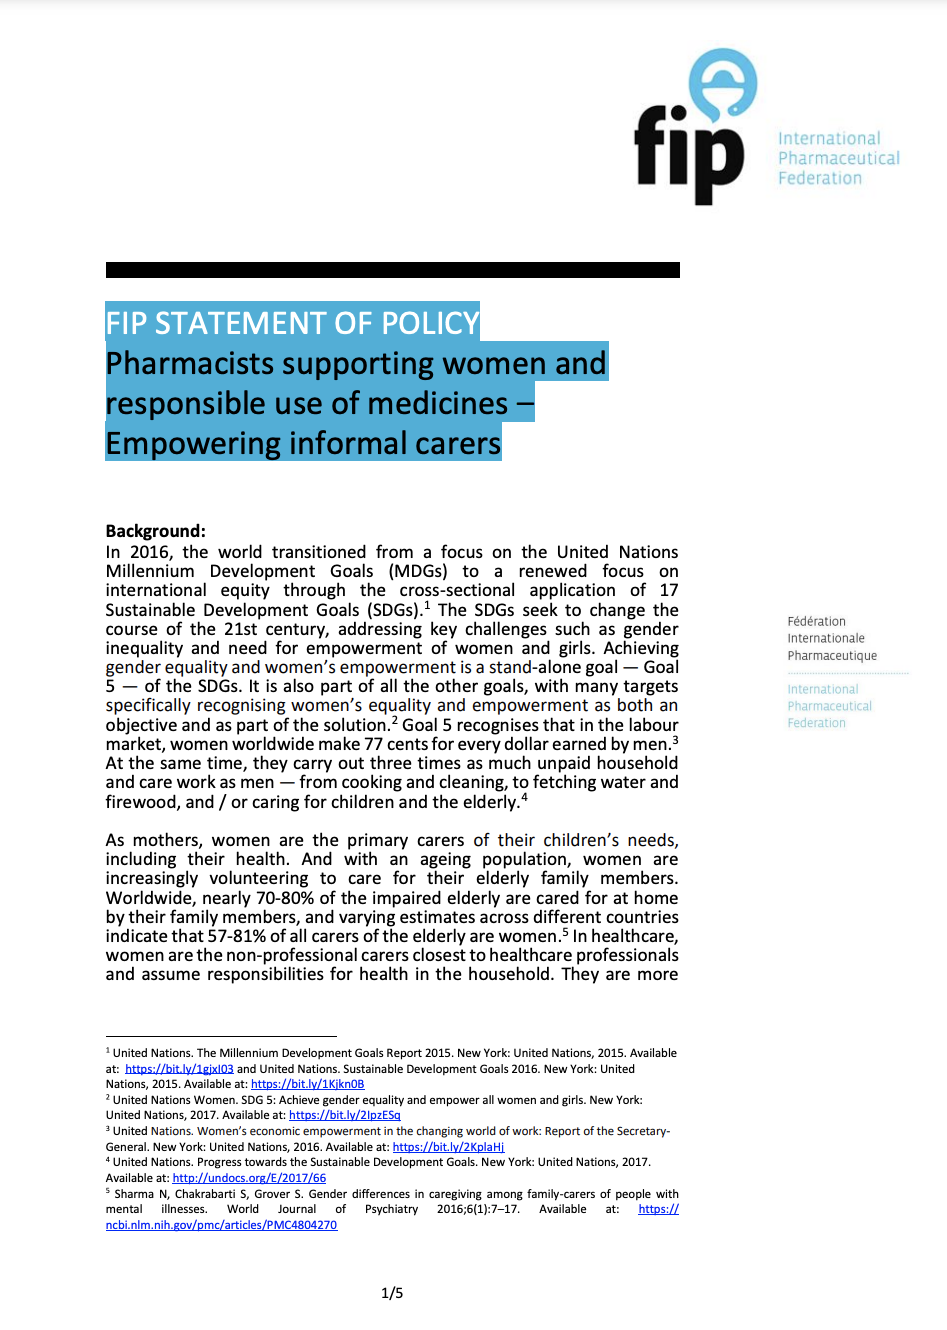 FIP Statement of Policy: Pharmacists supporting women and responsible use of medicines – Empowering informal carers (2019) Thumbnail